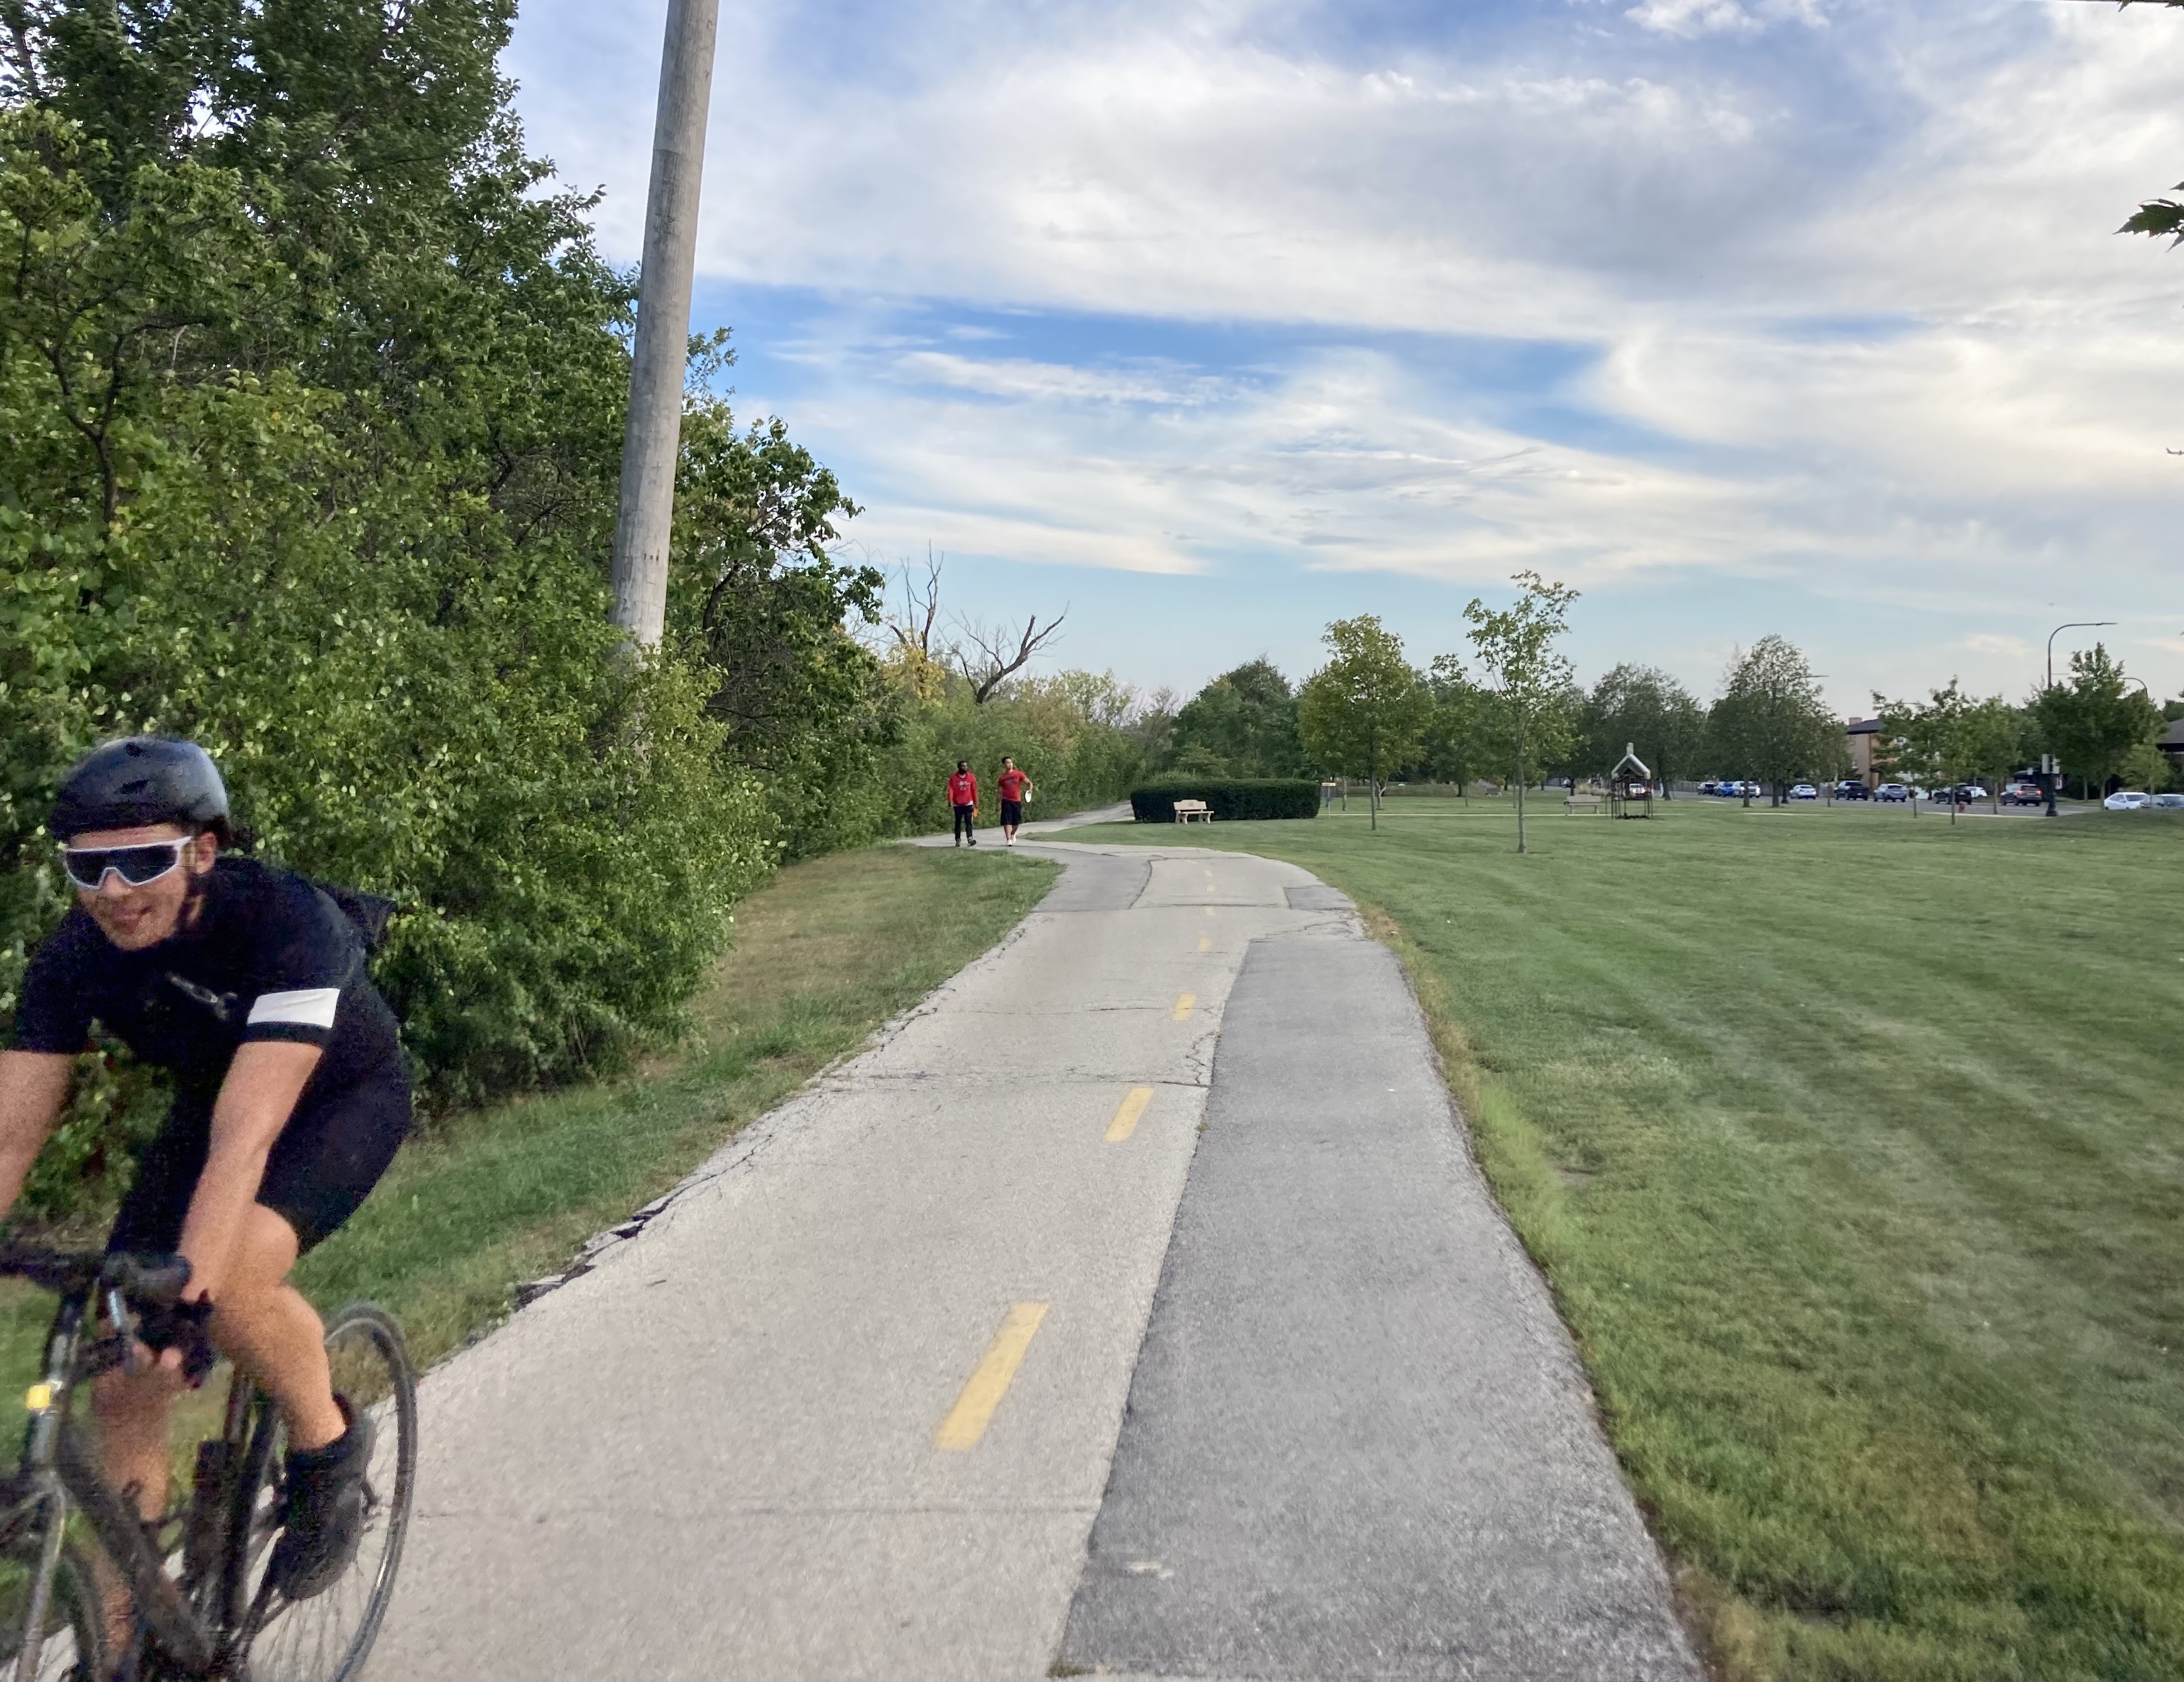 North Shore bike routes: new lane coming in June - North Shore News